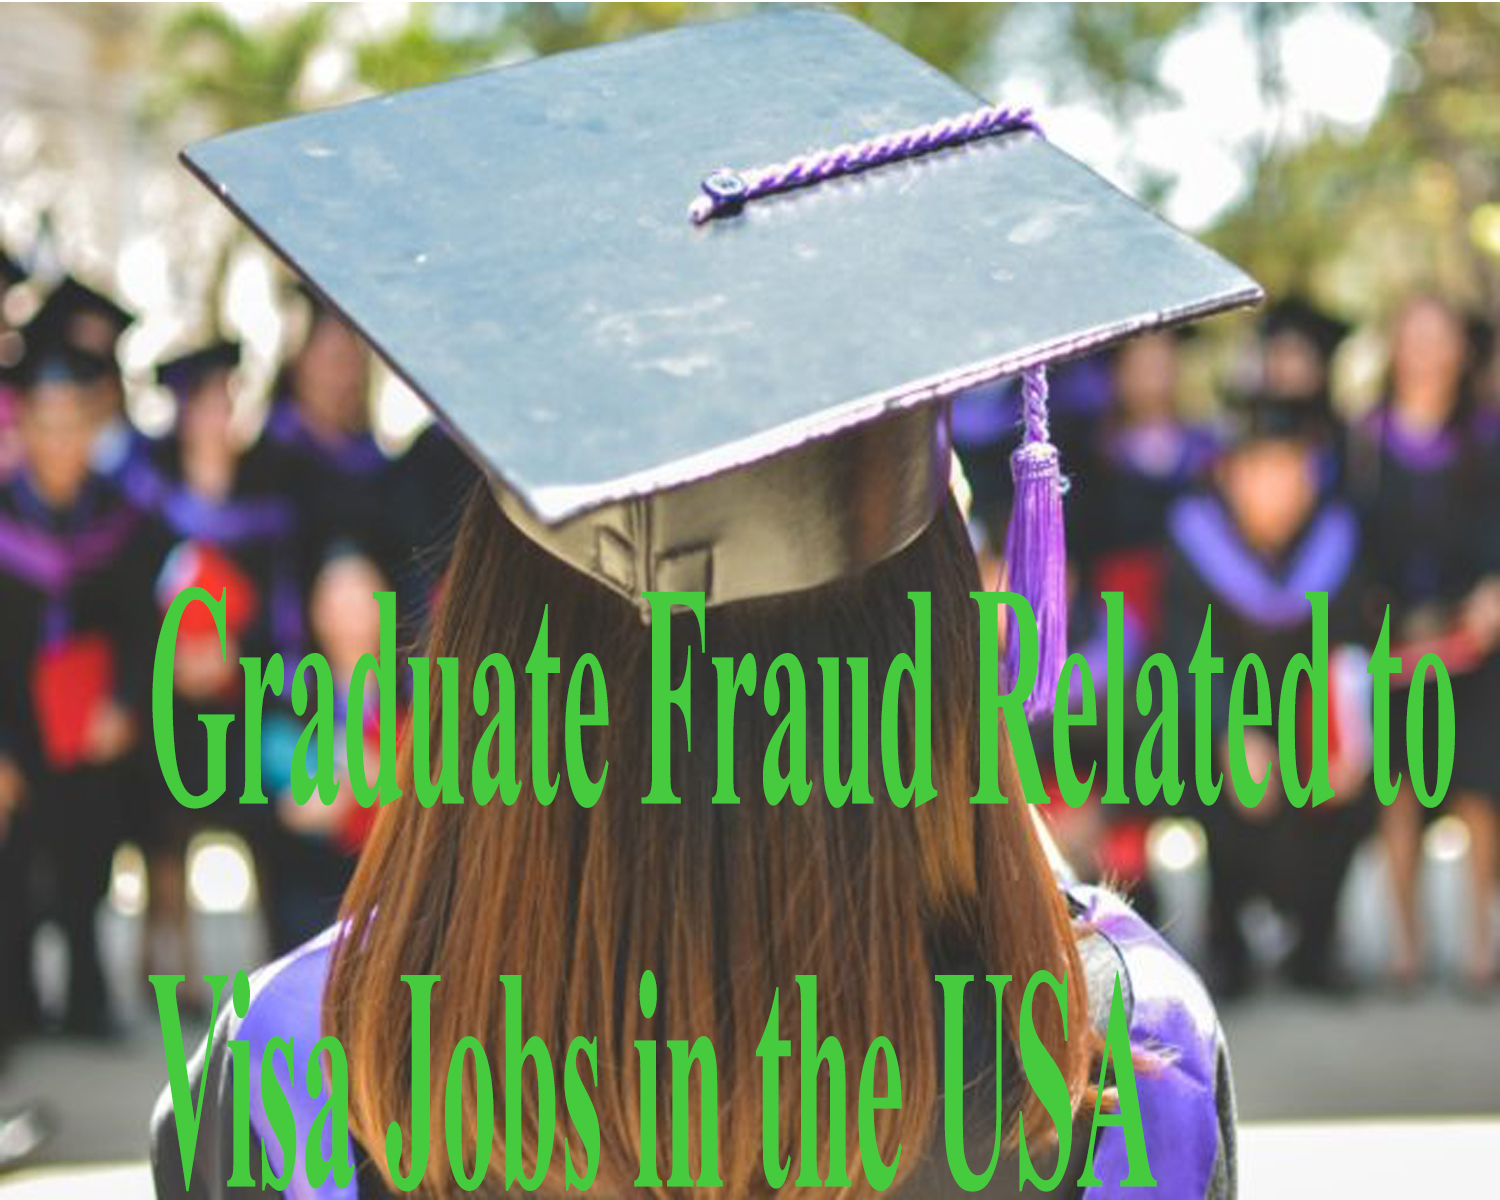 Graduate Fraud Related to Visa Jobs in the USA